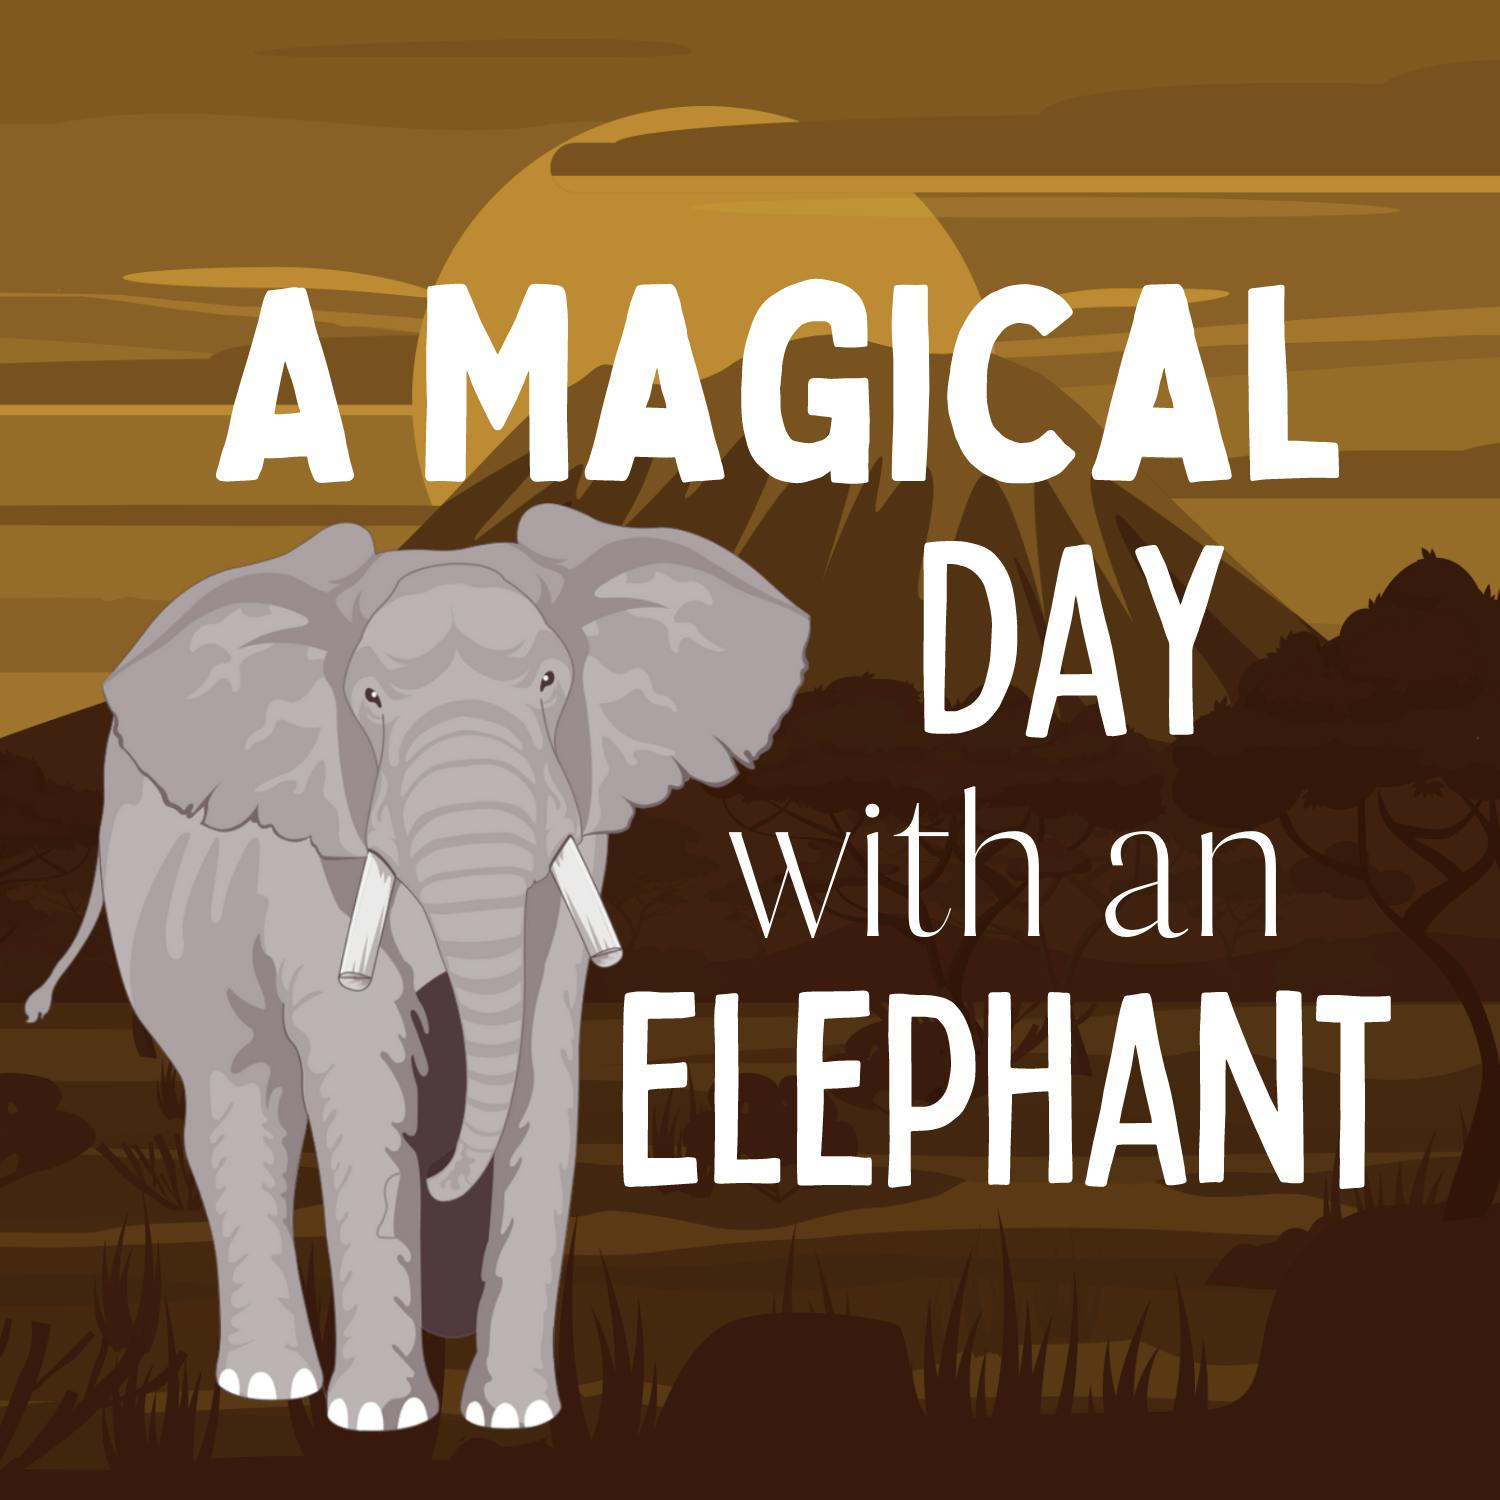 A Magical Day with an Elephant